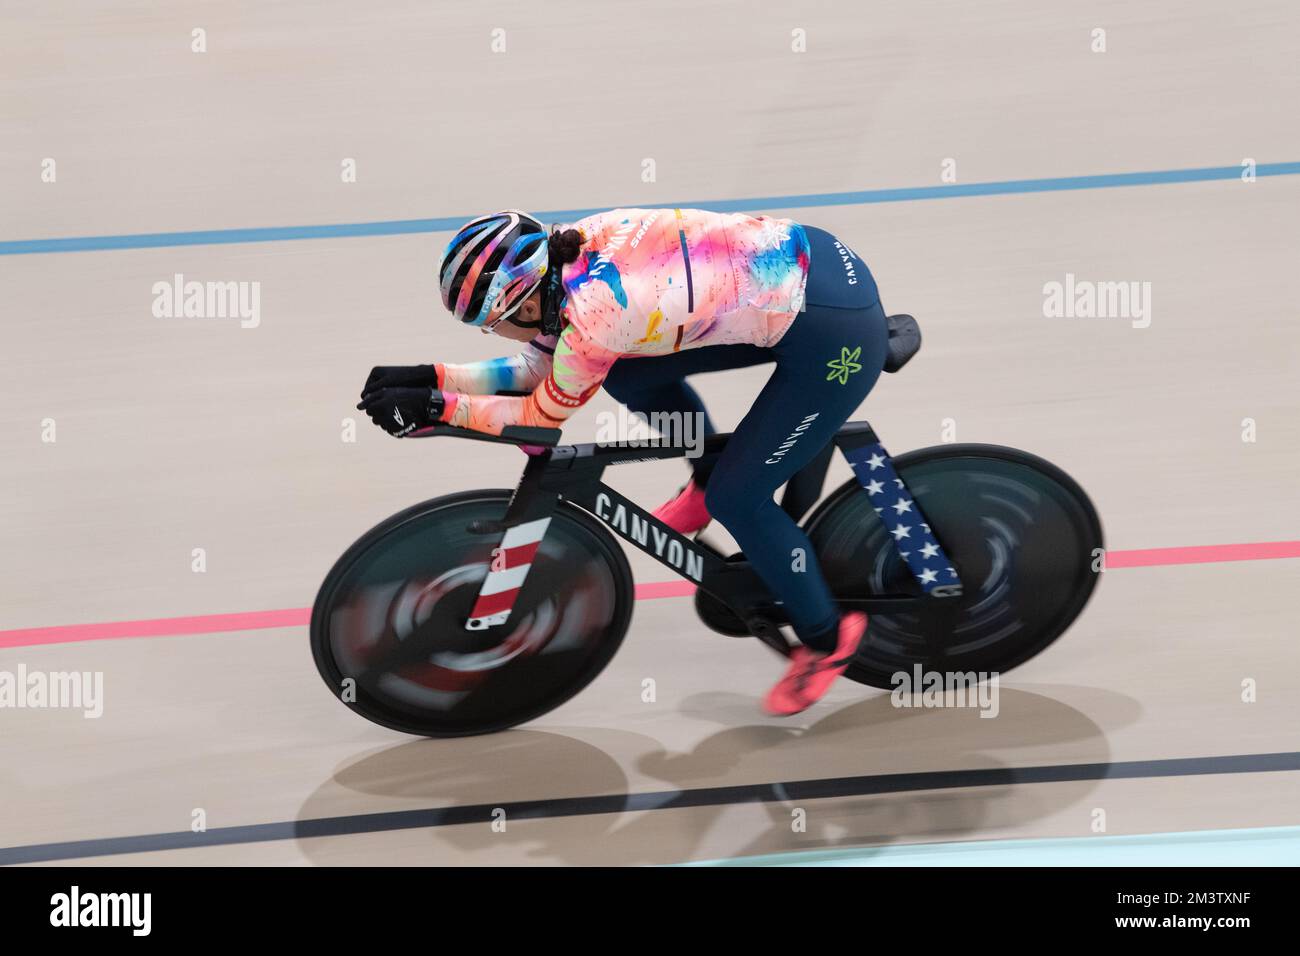 Individual pursuit World champion Chloe Dygert training on her new Canyon pursuit bike at the 7 Eleven Velodrome in Colorado Springs. Stock Photo